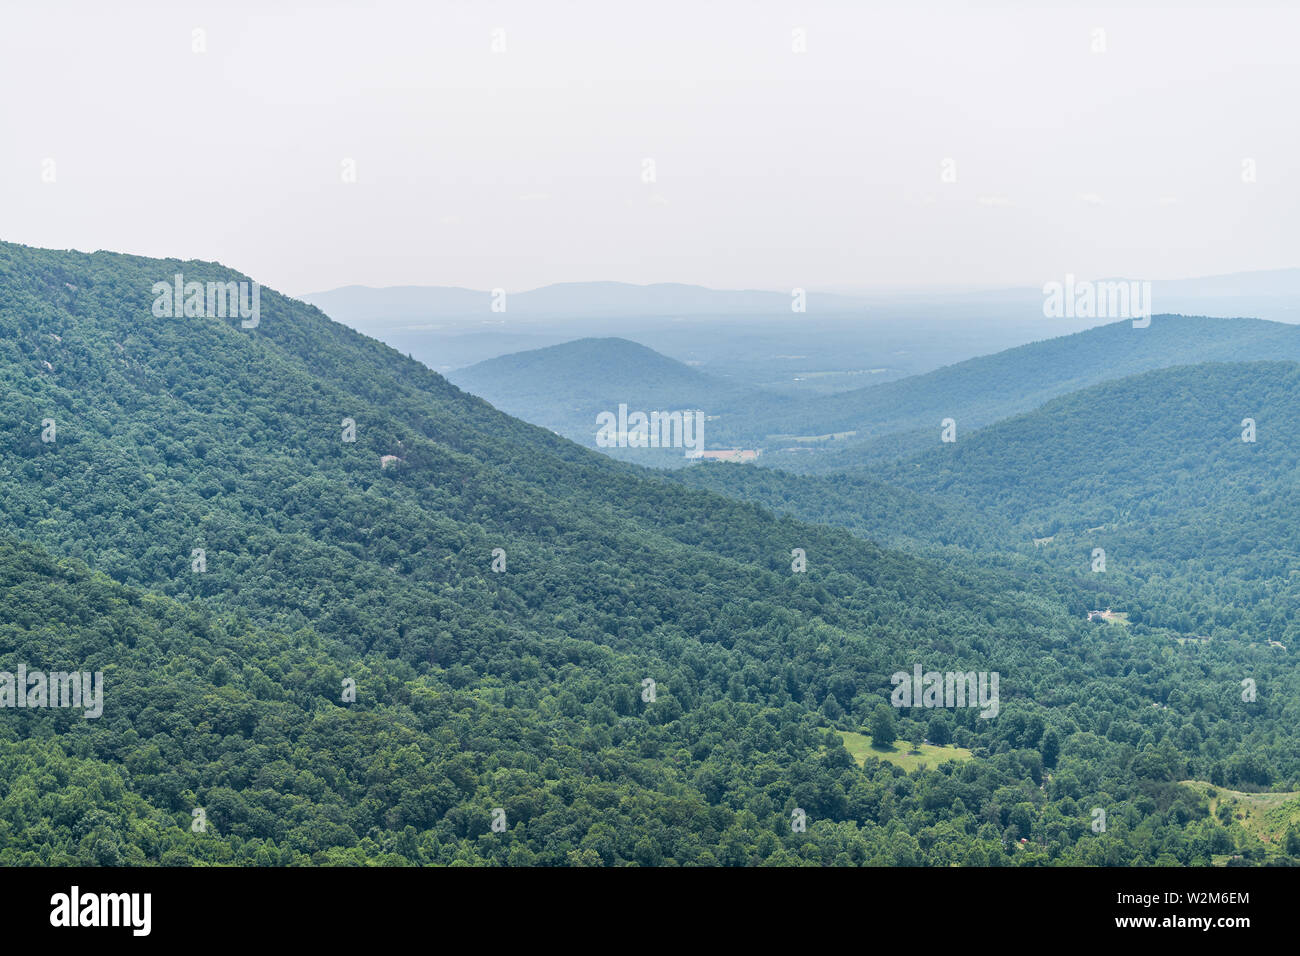 View of horizon in Shenandoah Blue Ridge appalachian mountains on skyline drive overlook and rolling hills Stock Photo